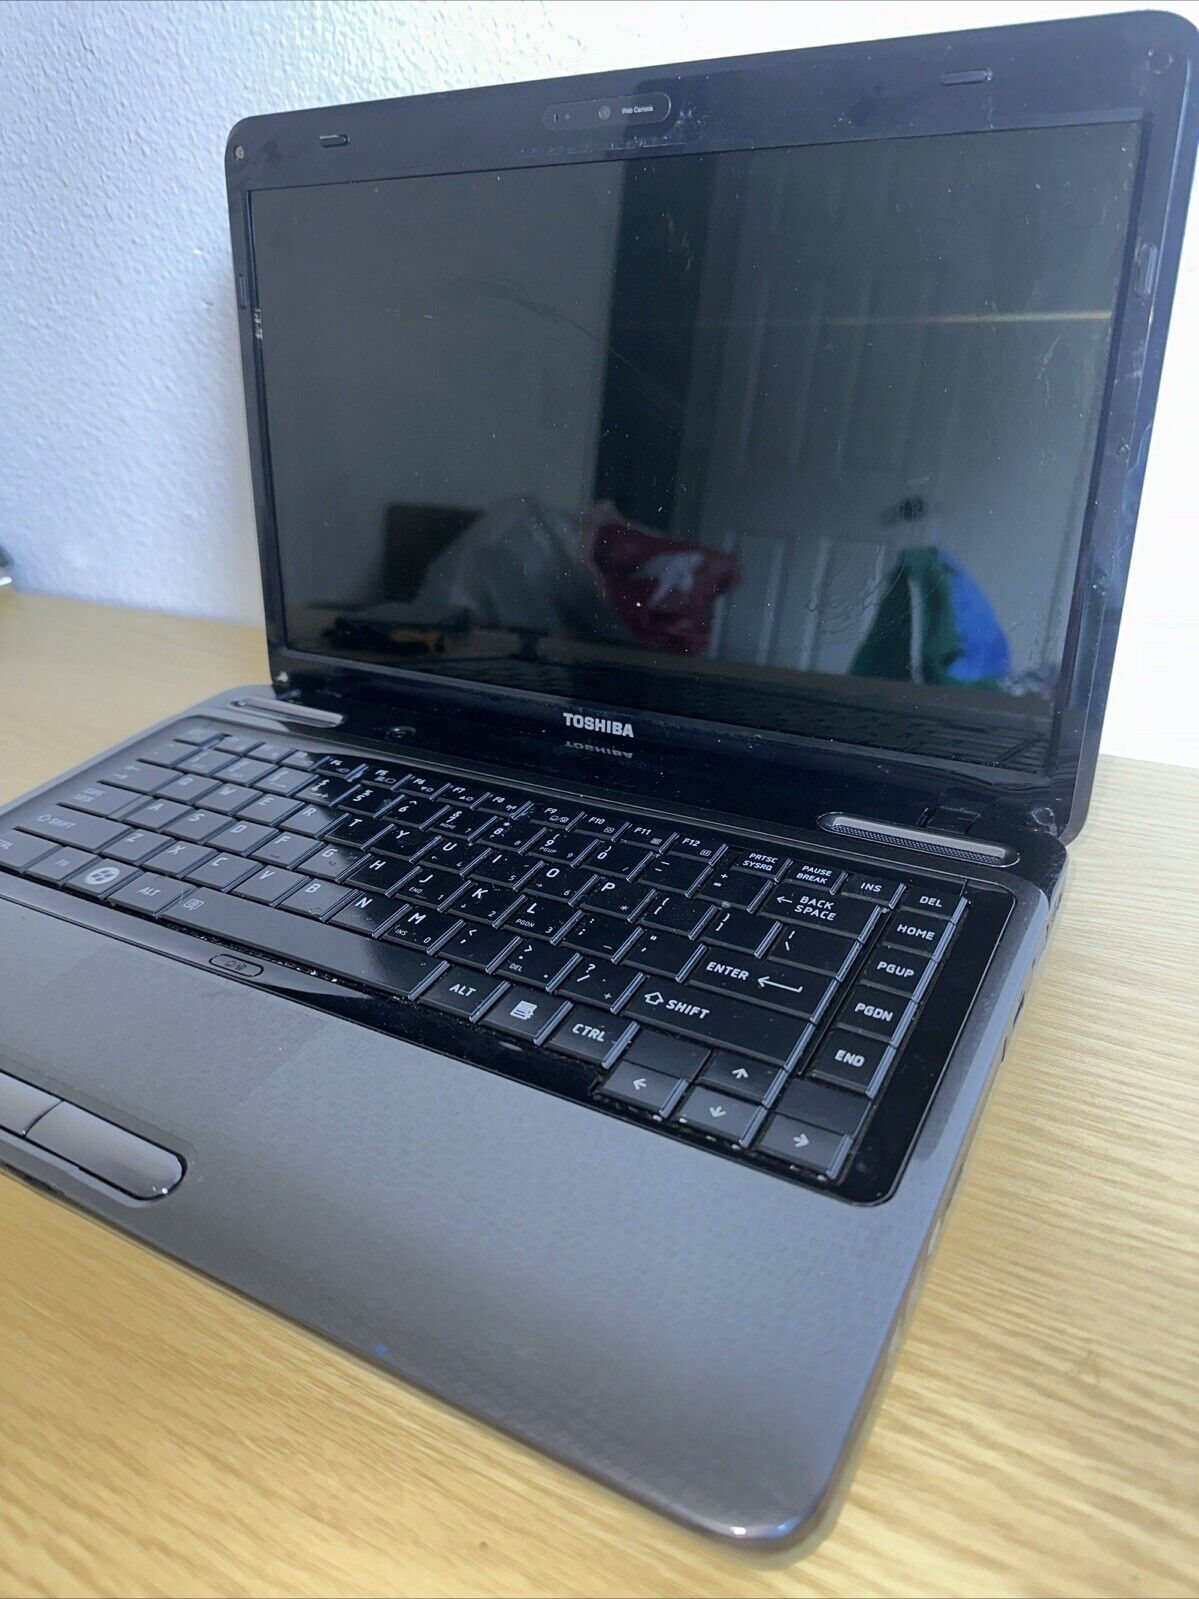 Toshiba Satellite L645D -S4030 Notebook. Doesn’t Power Up